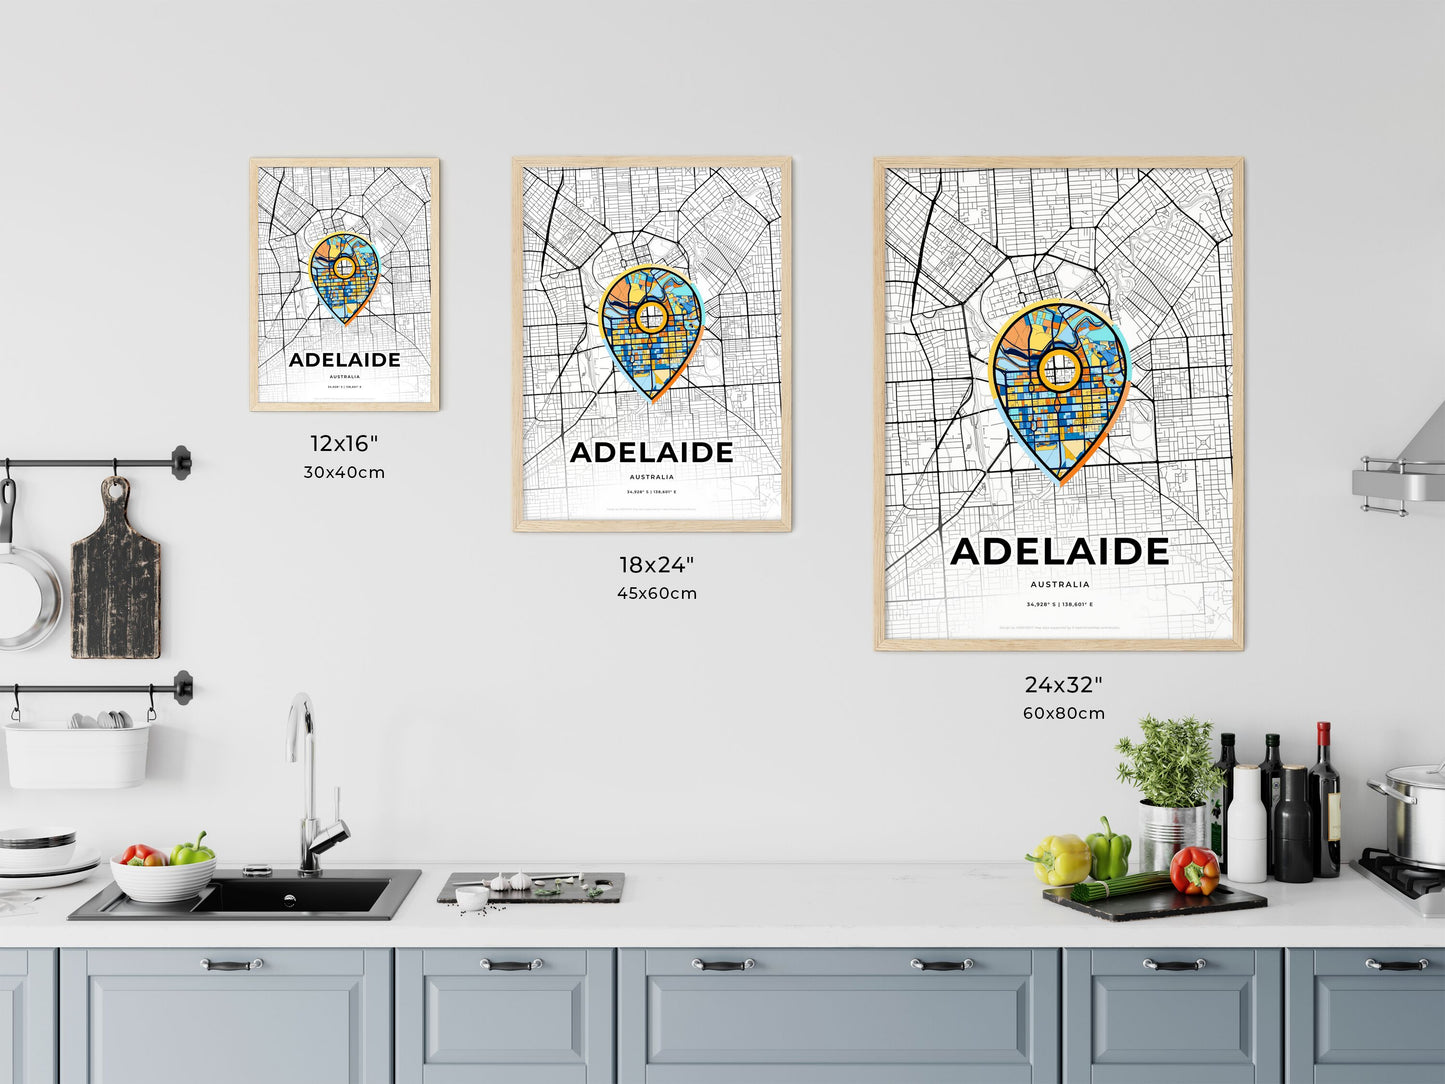 ADELAIDE AUSTRALIA minimal art map with a colorful icon. Where it all began, Couple map gift.